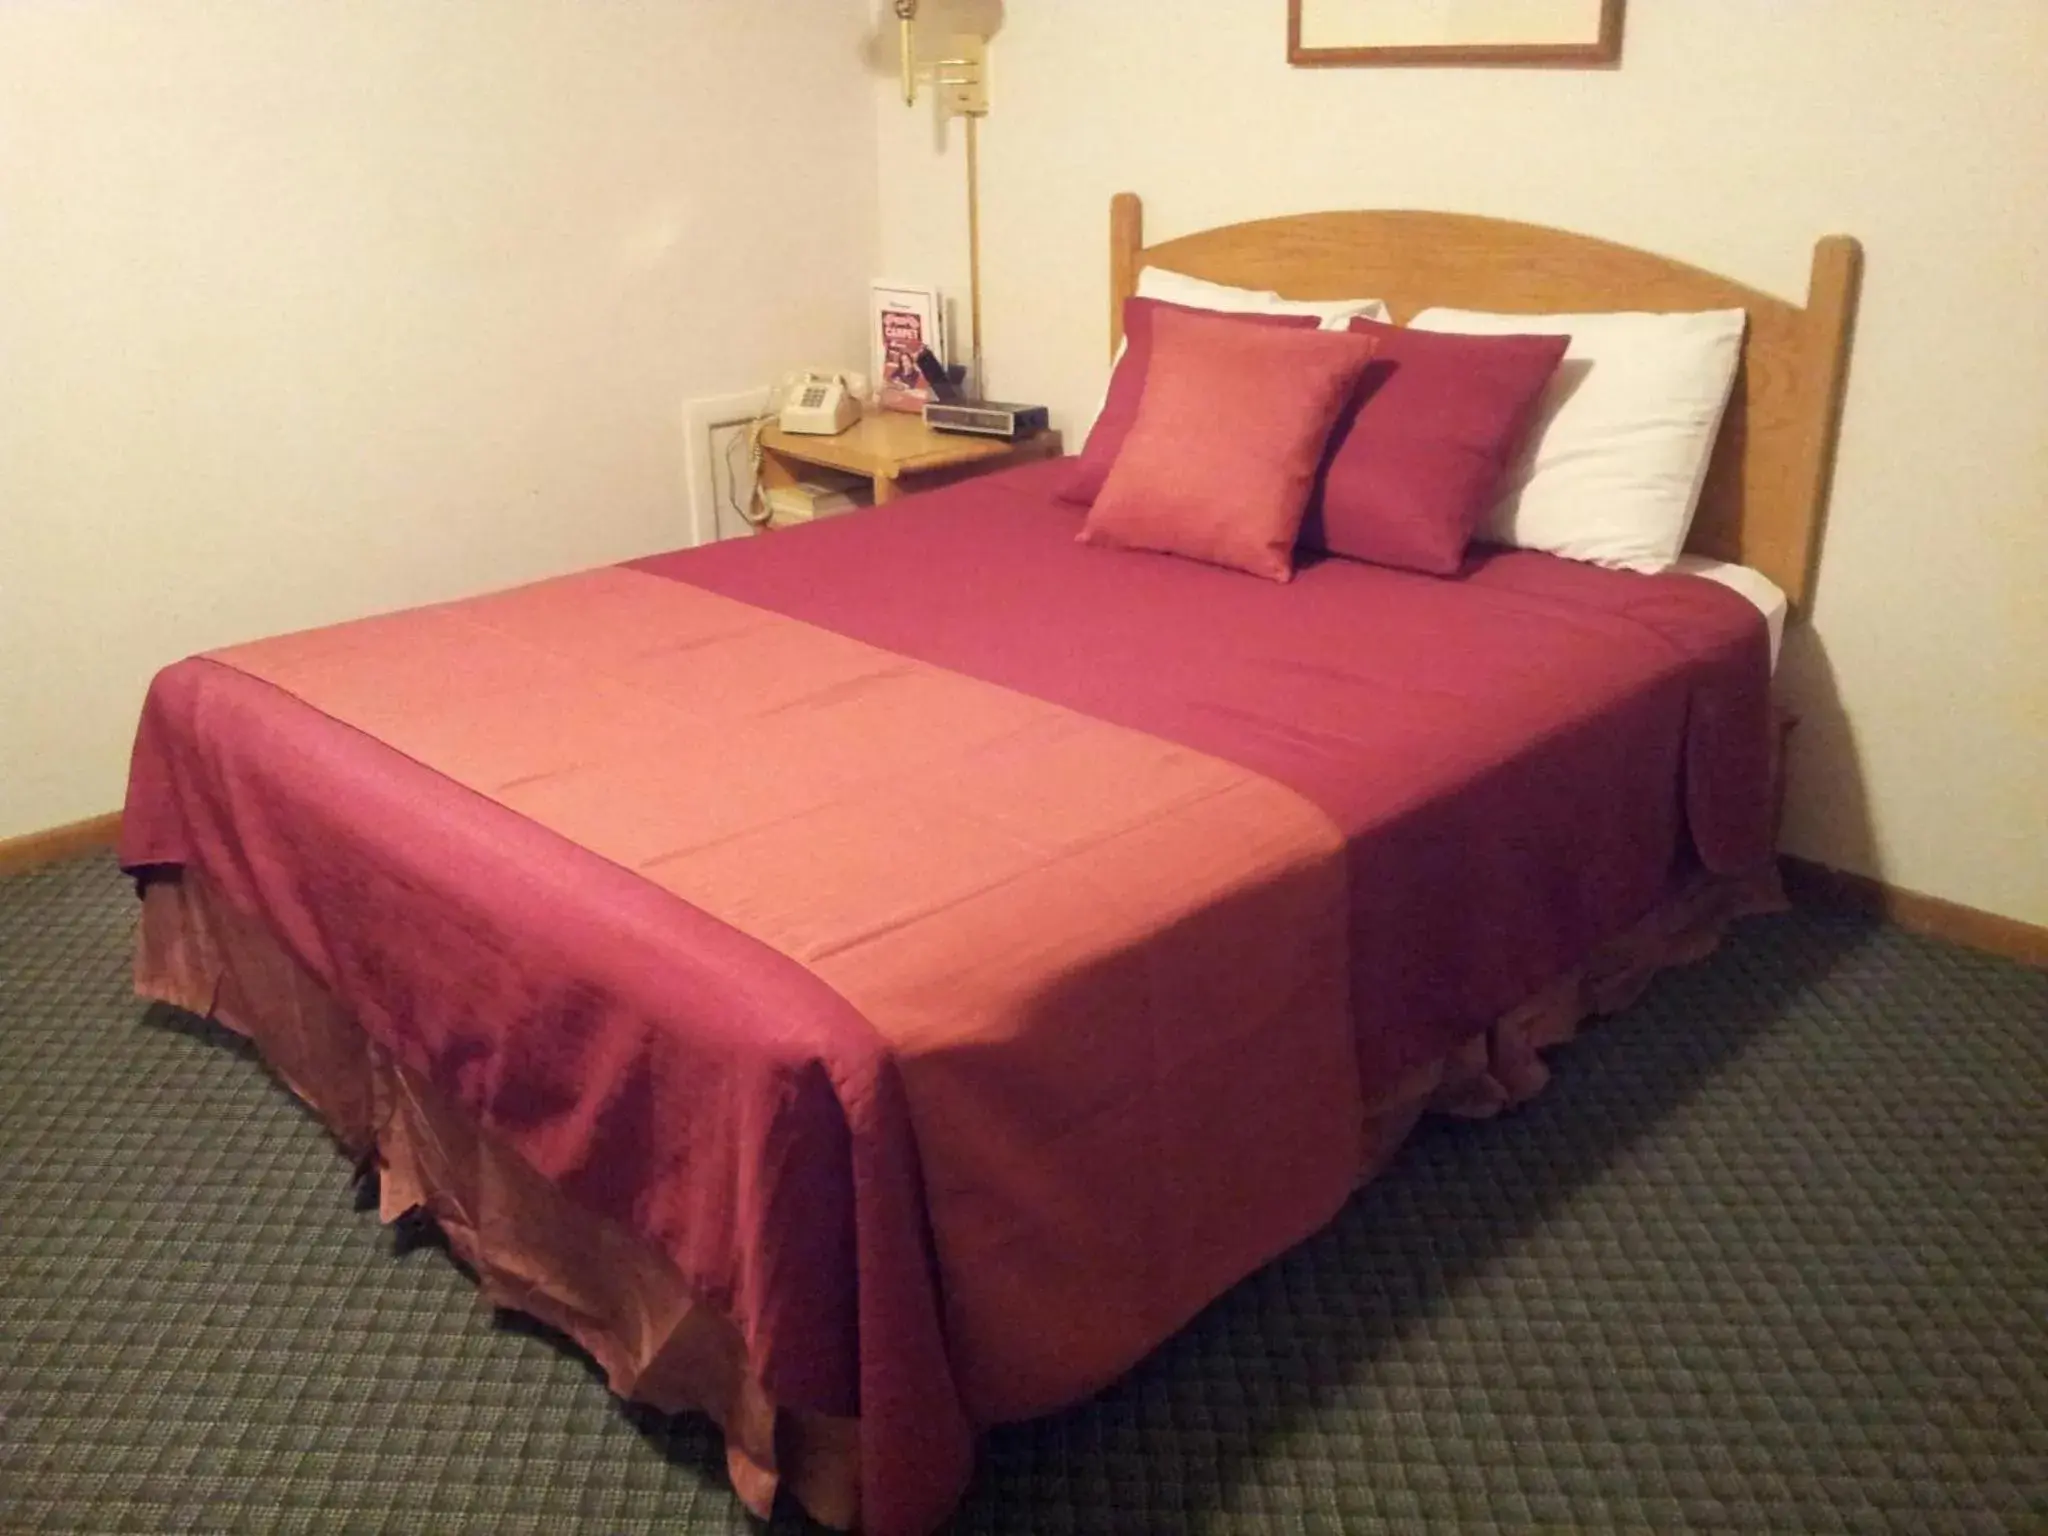 Bed in Red Carpet Motel - Knoxville